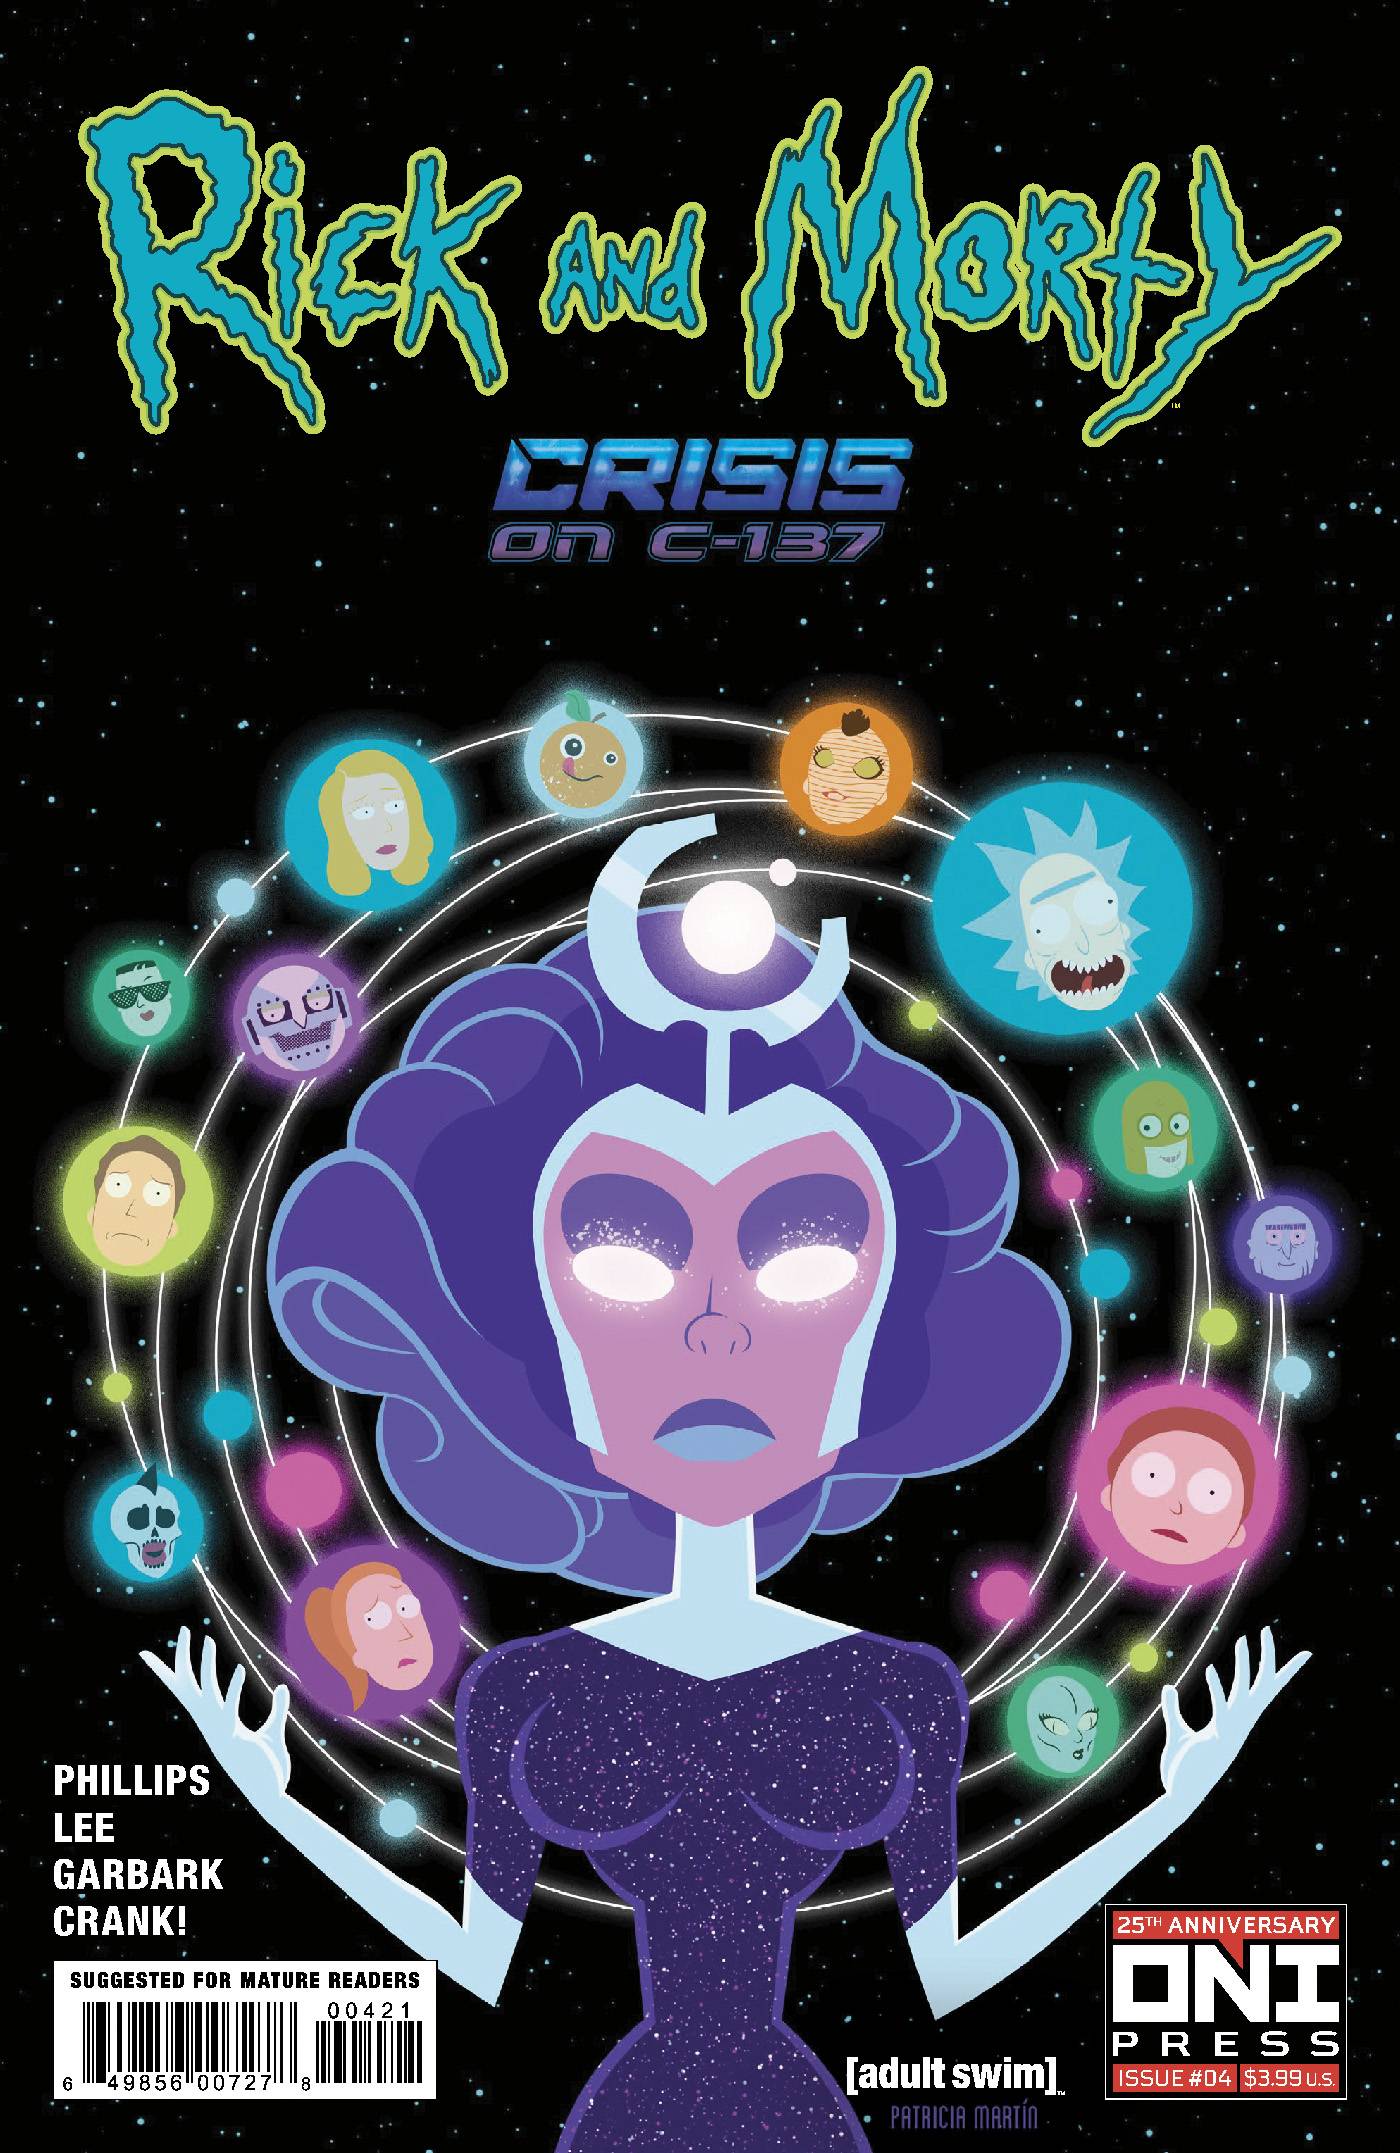 Rick & Morty Crisis On C 137 #4 Cover A